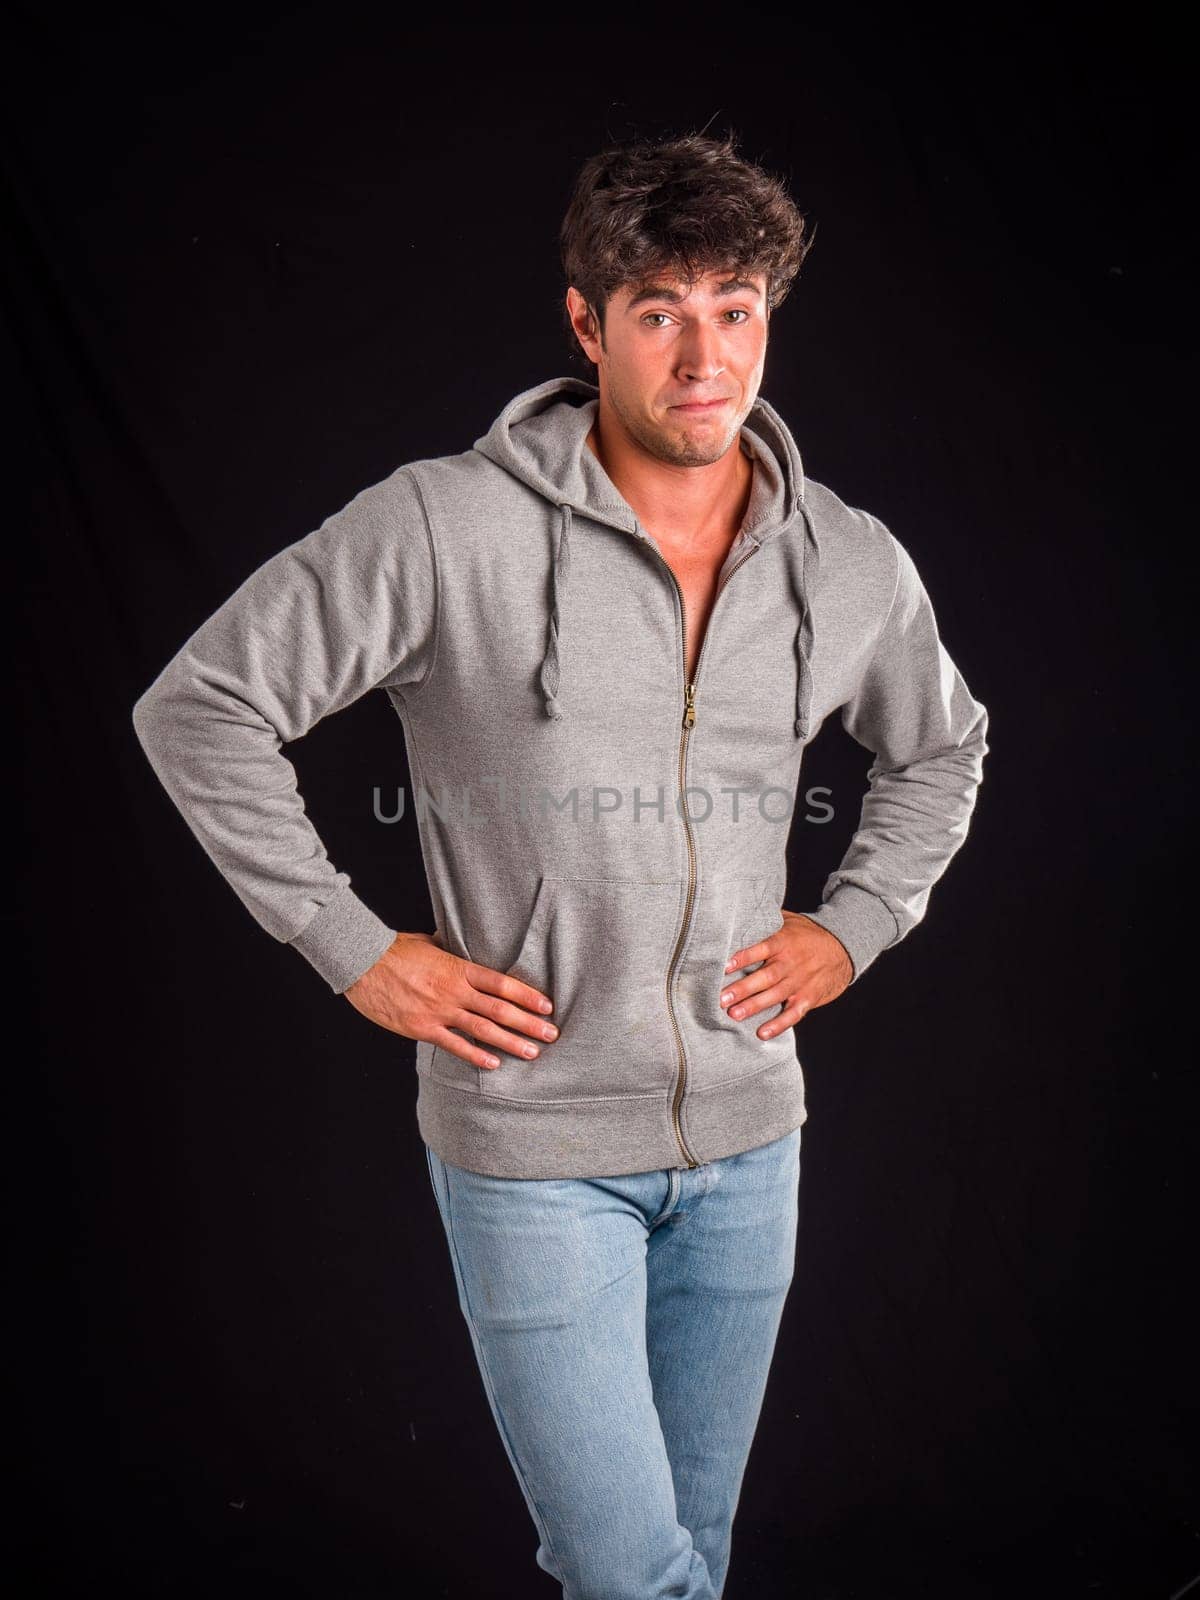 Photo of a man in a gray hoodie posing for a picture by artofphoto